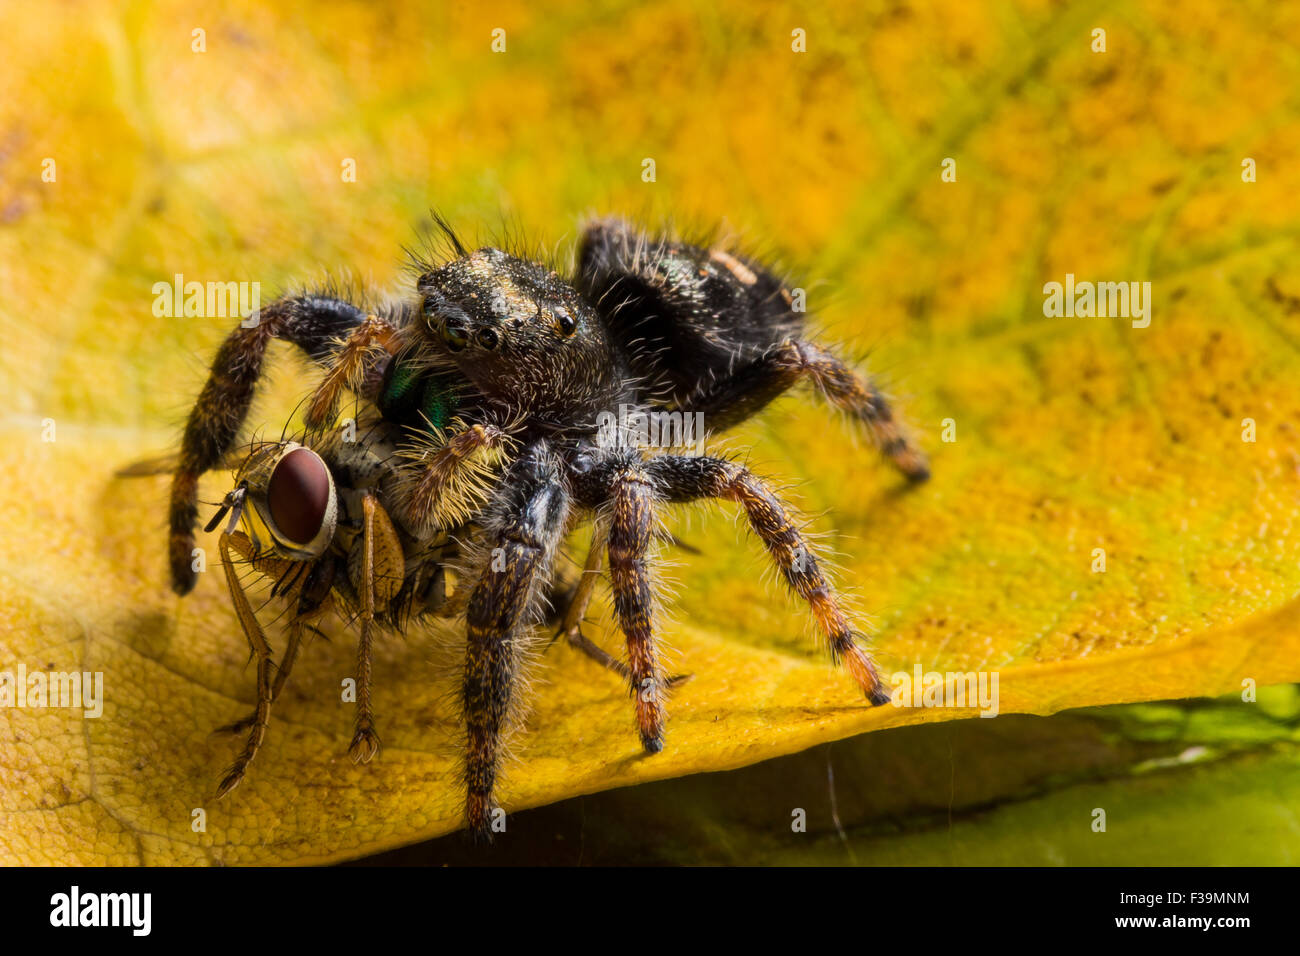 Black jumping spider with shiny green mouth eats fly with red eyes on ...